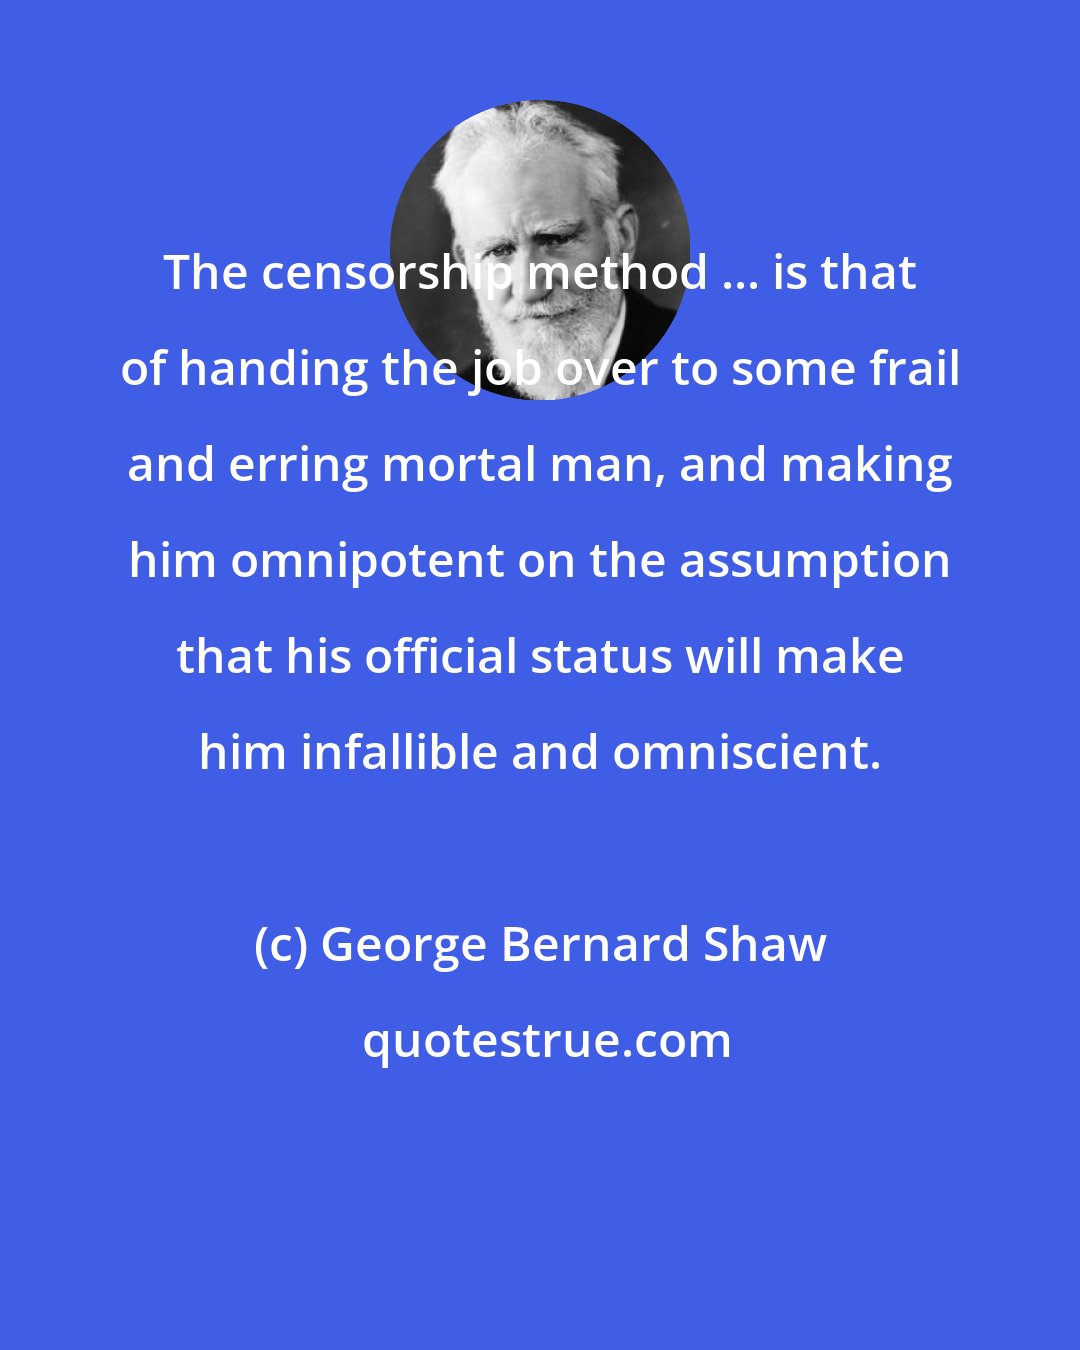 George Bernard Shaw: The censorship method ... is that of handing the job over to some frail and erring mortal man, and making him omnipotent on the assumption that his official status will make him infallible and omniscient.